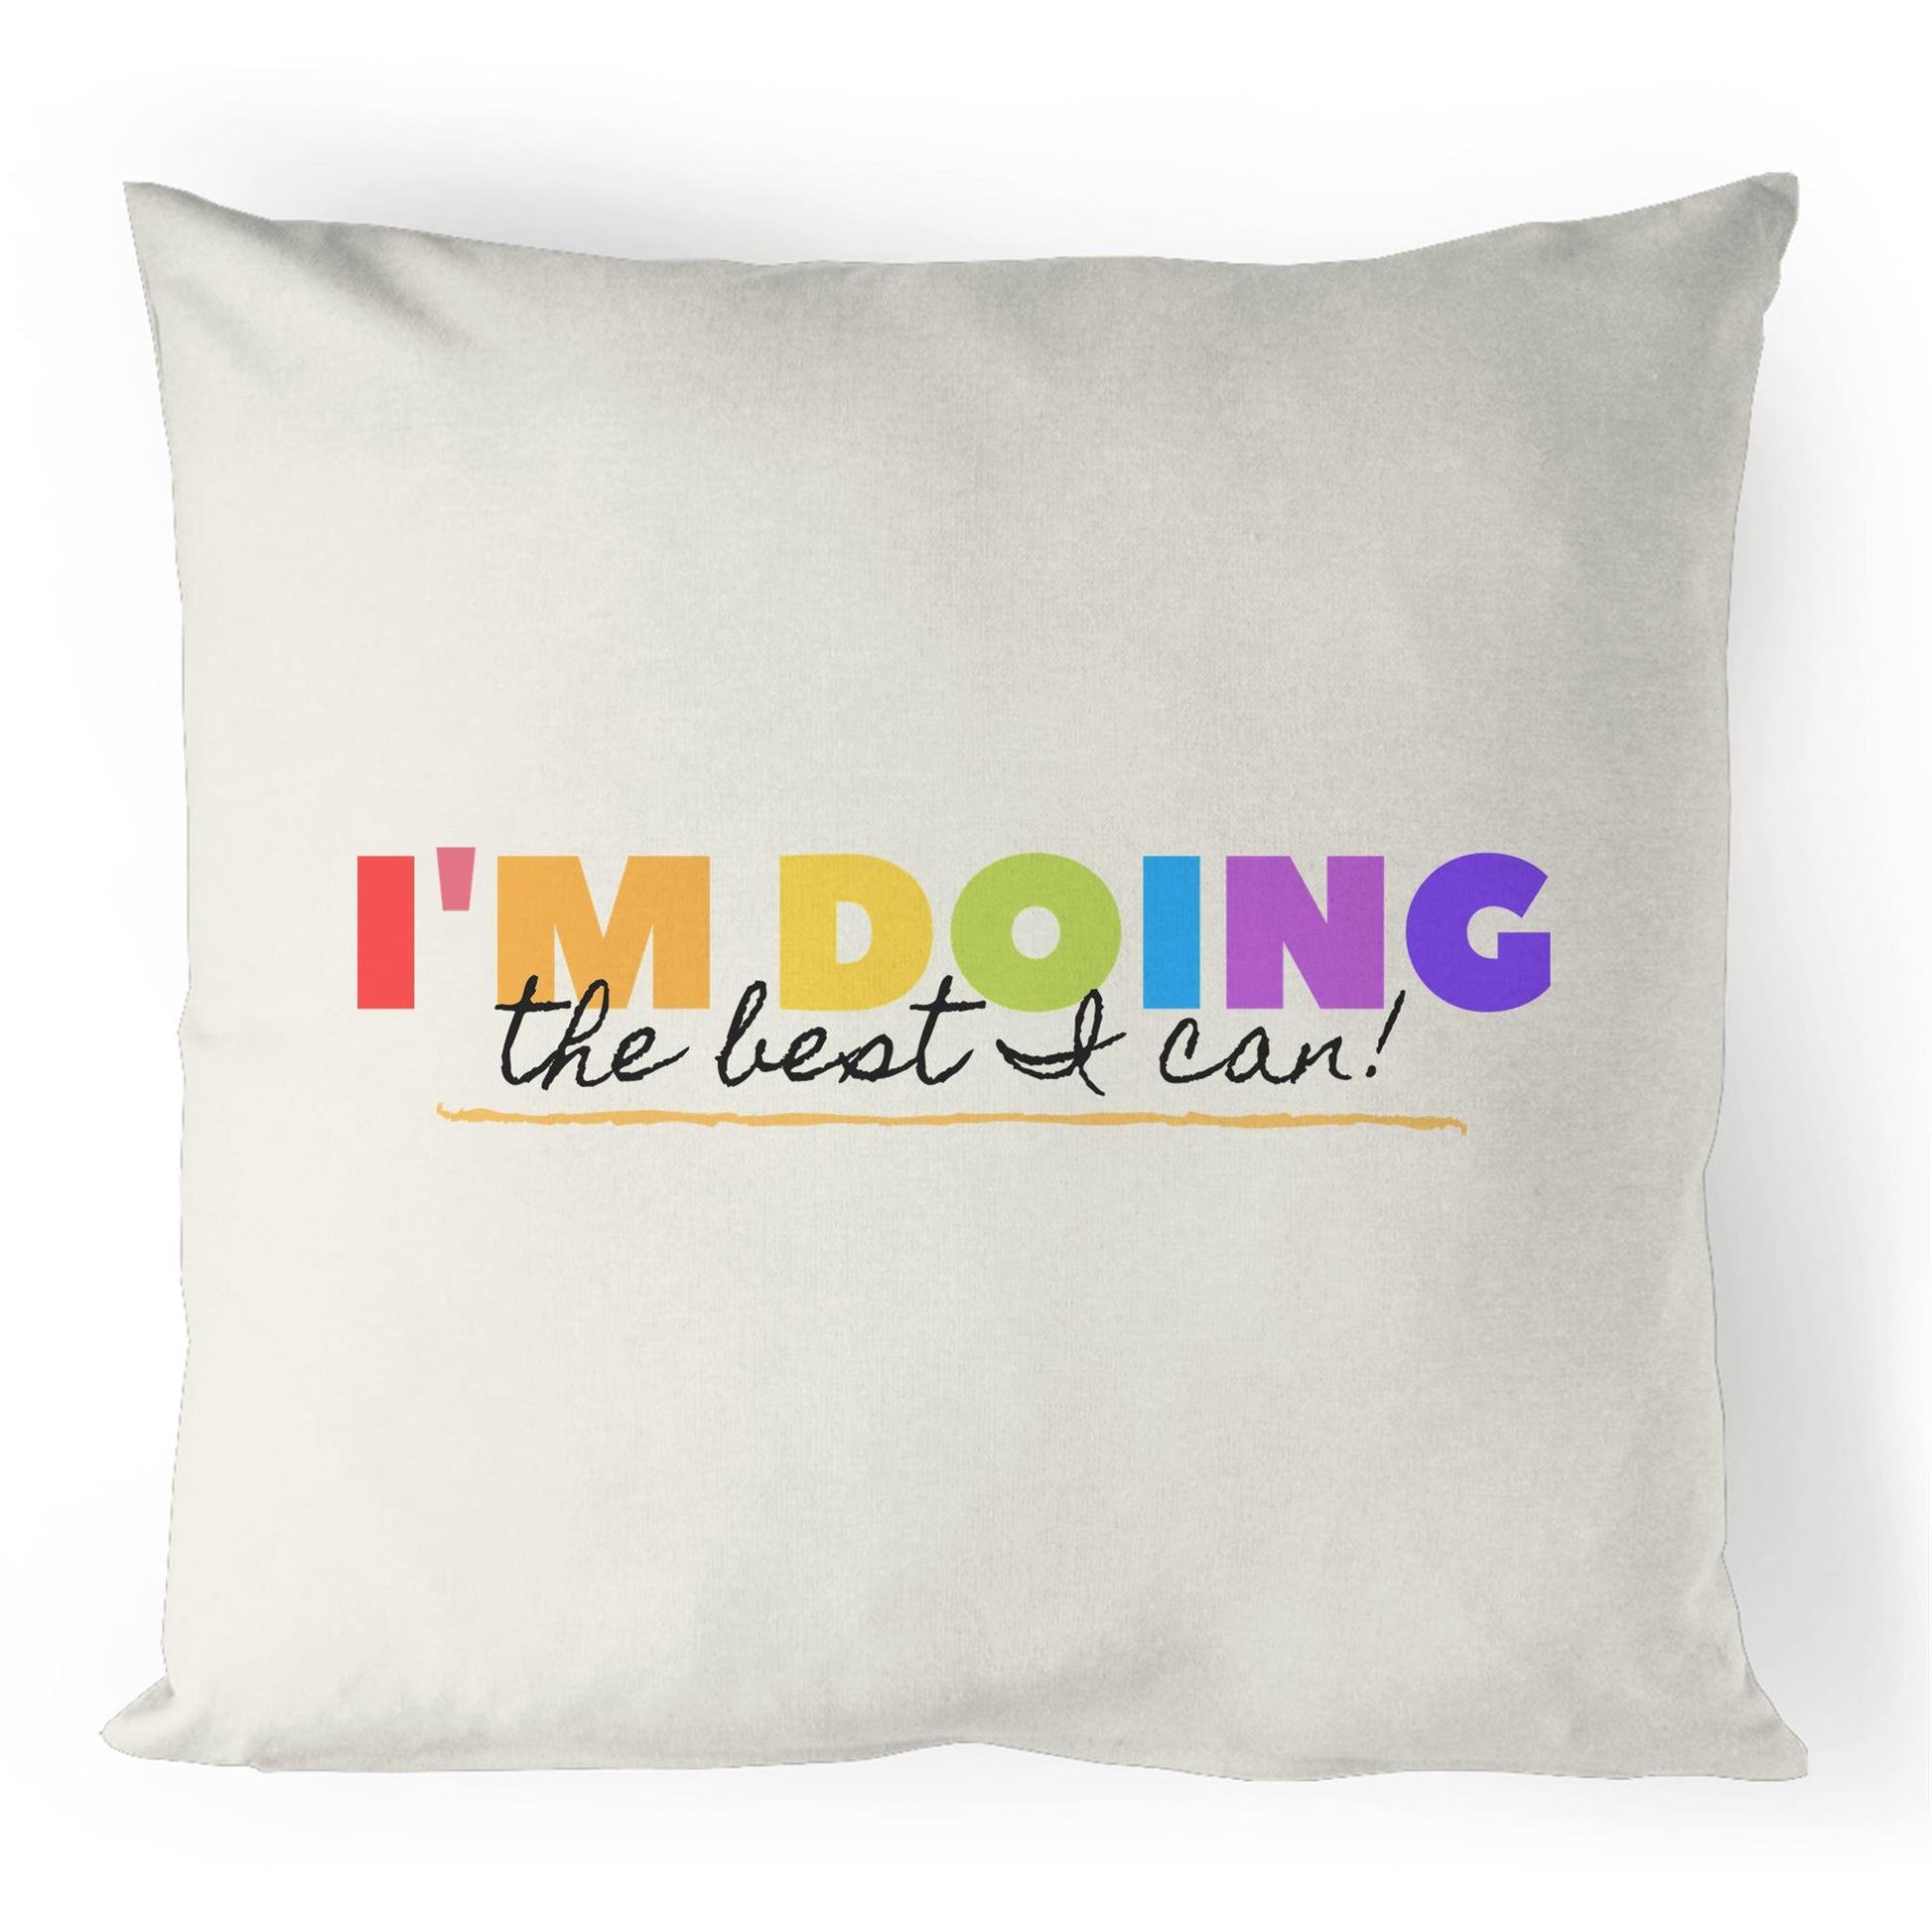 I'm Doing The Best I Can - 100% Linen Cushion Cover Default Title Linen Cushion Cover